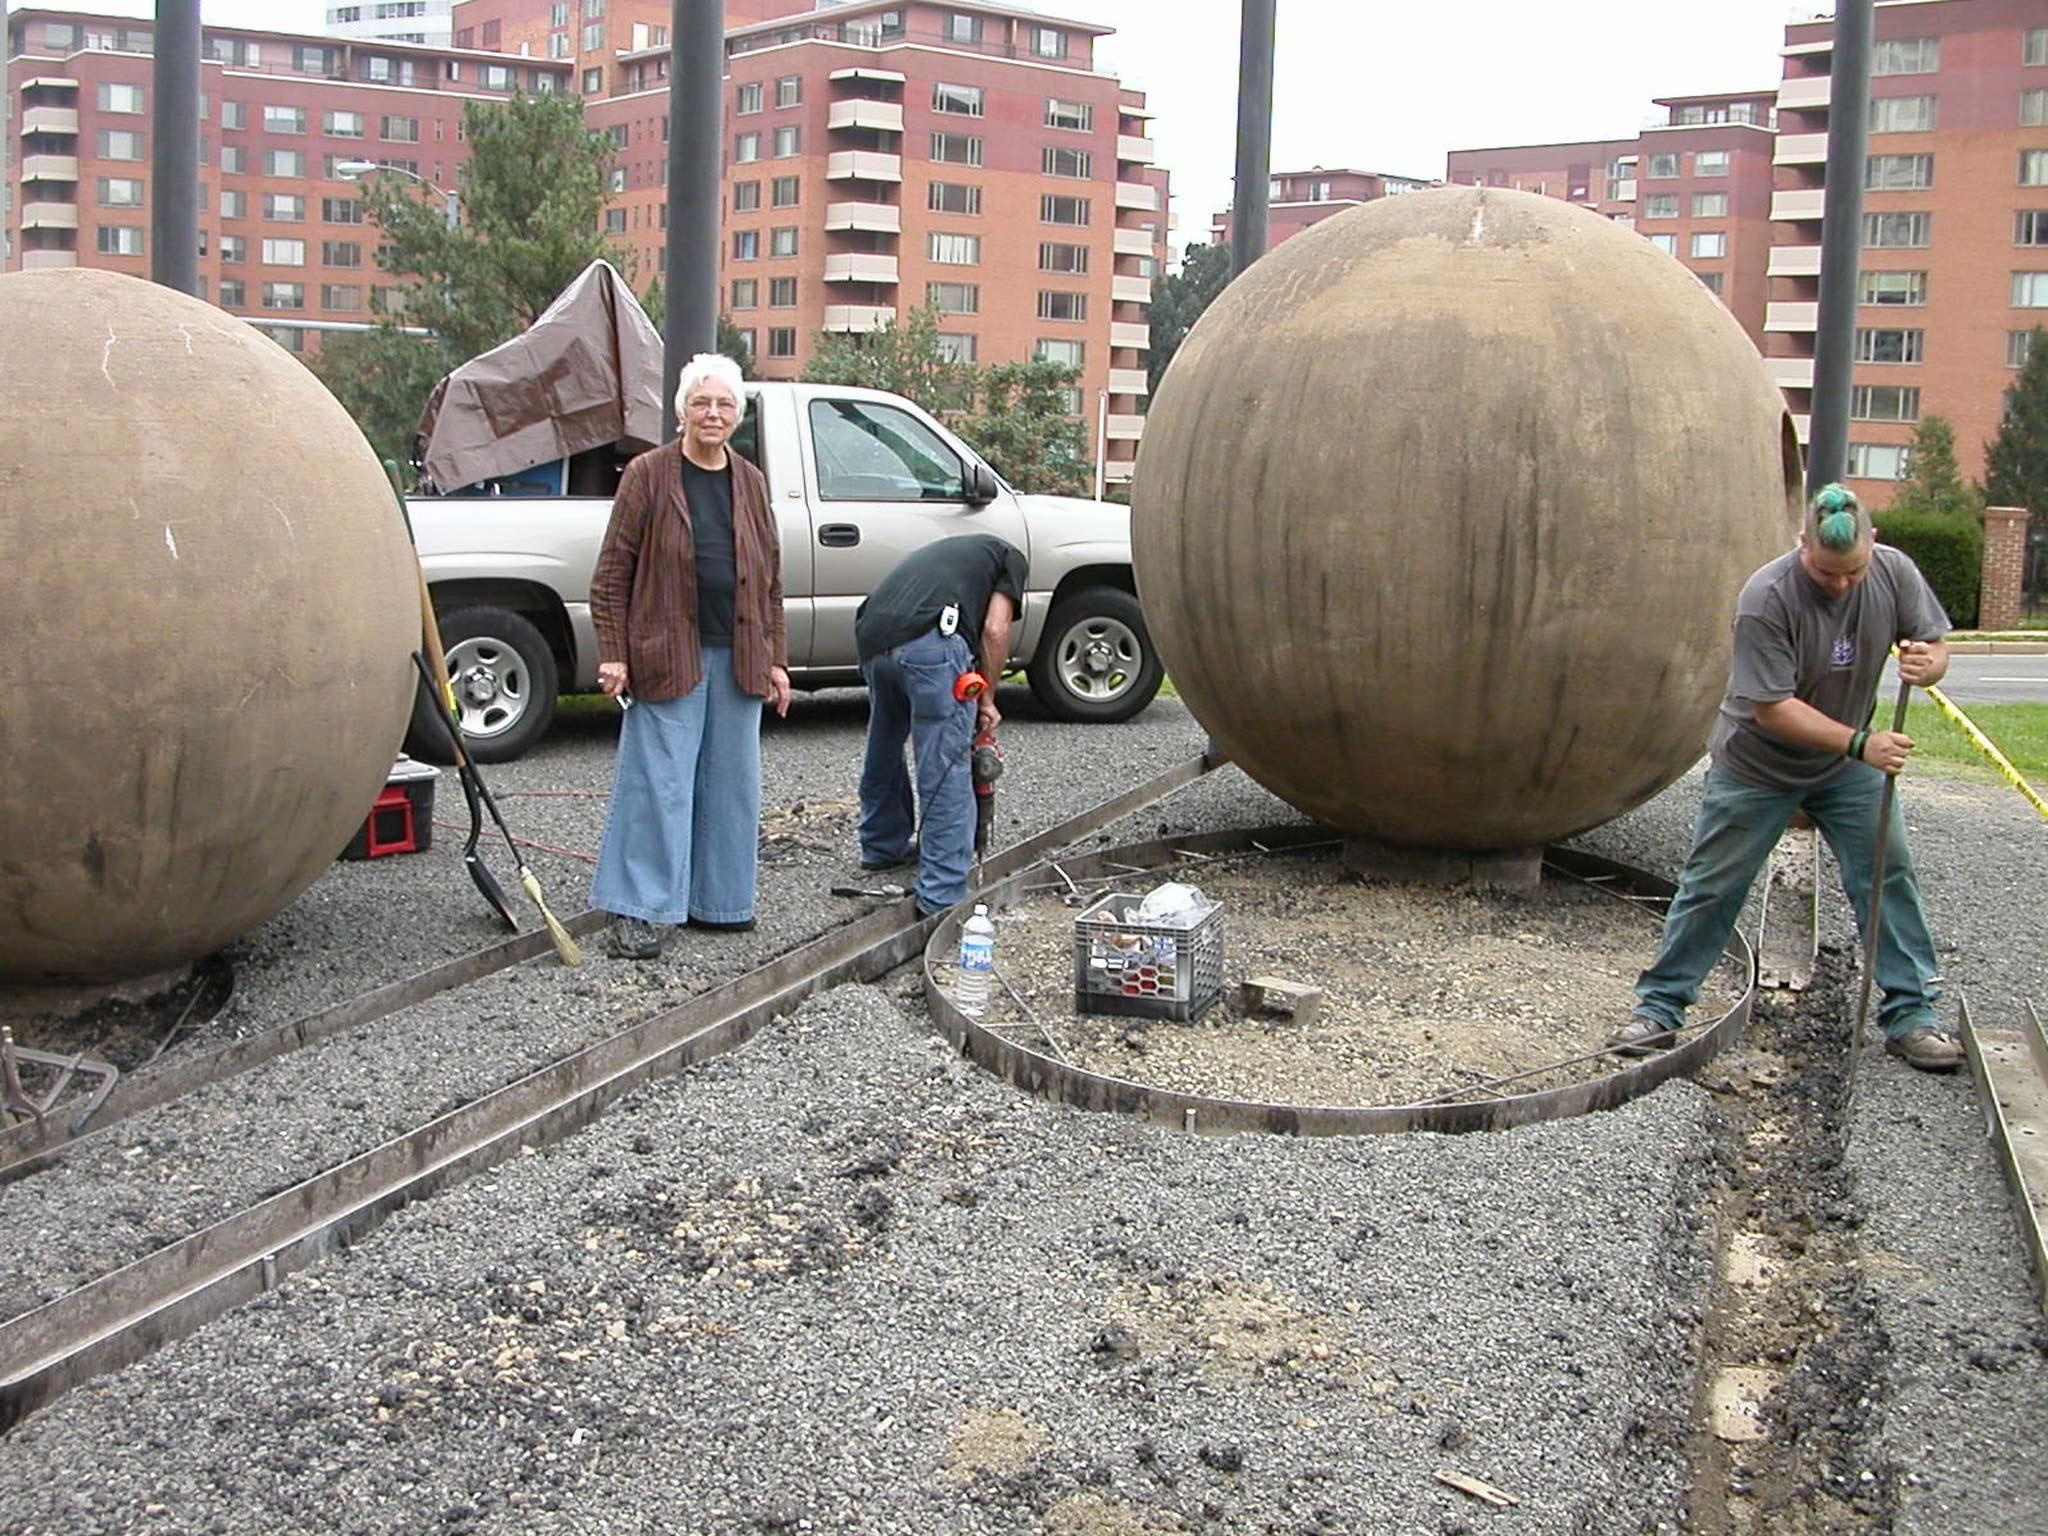 two figures working and one figure looking at the camera at a construction site, renovating large concrete spheres.